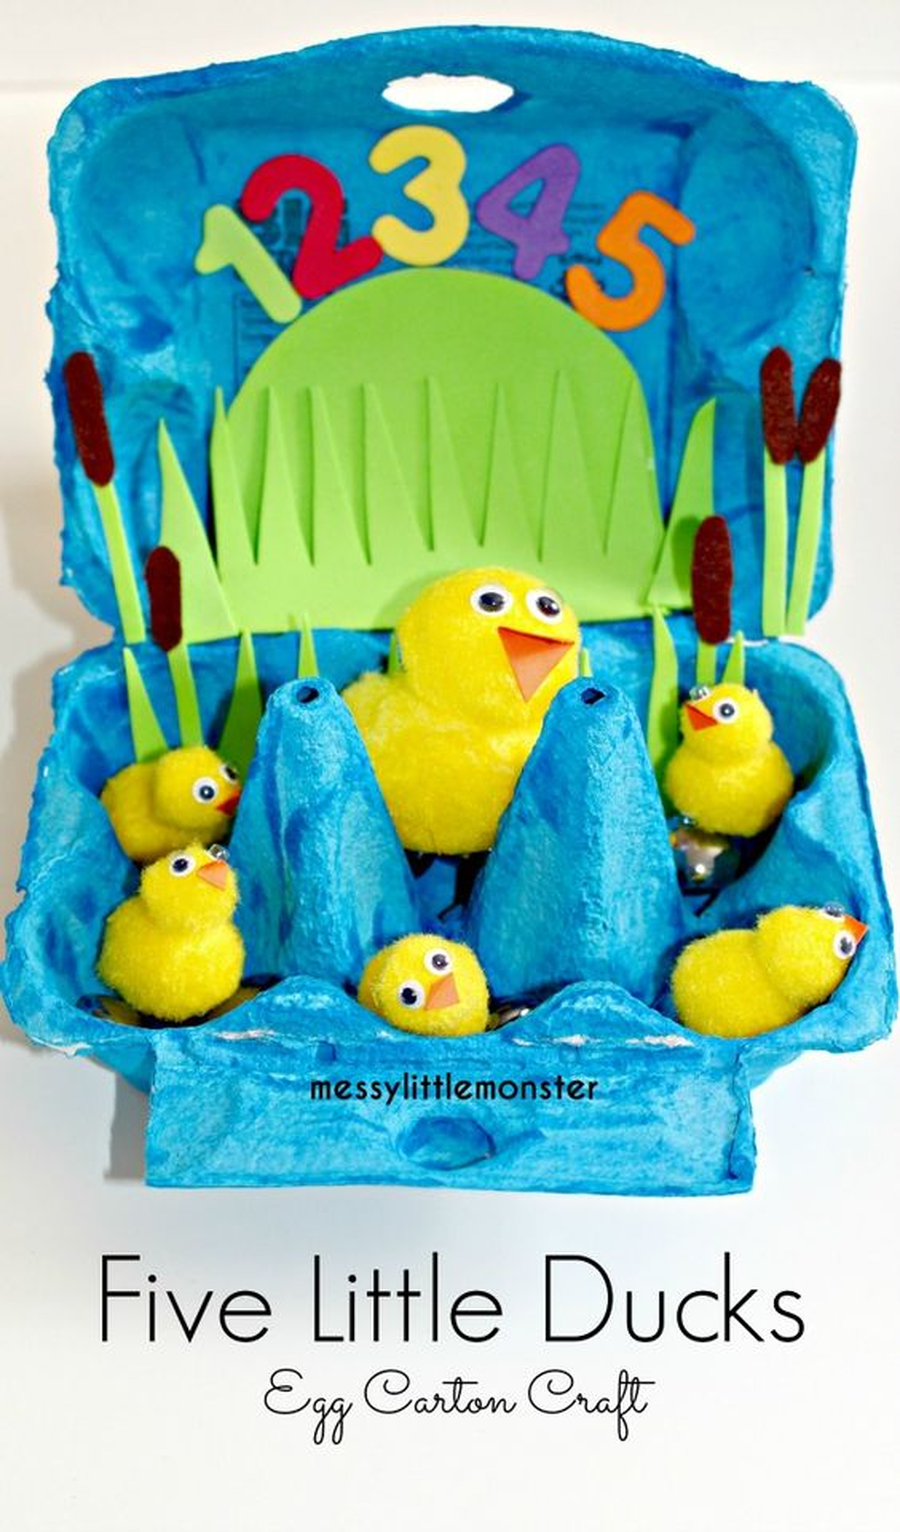 Make a pond for your Five Little Ducks and sing the song while taking a duck away.